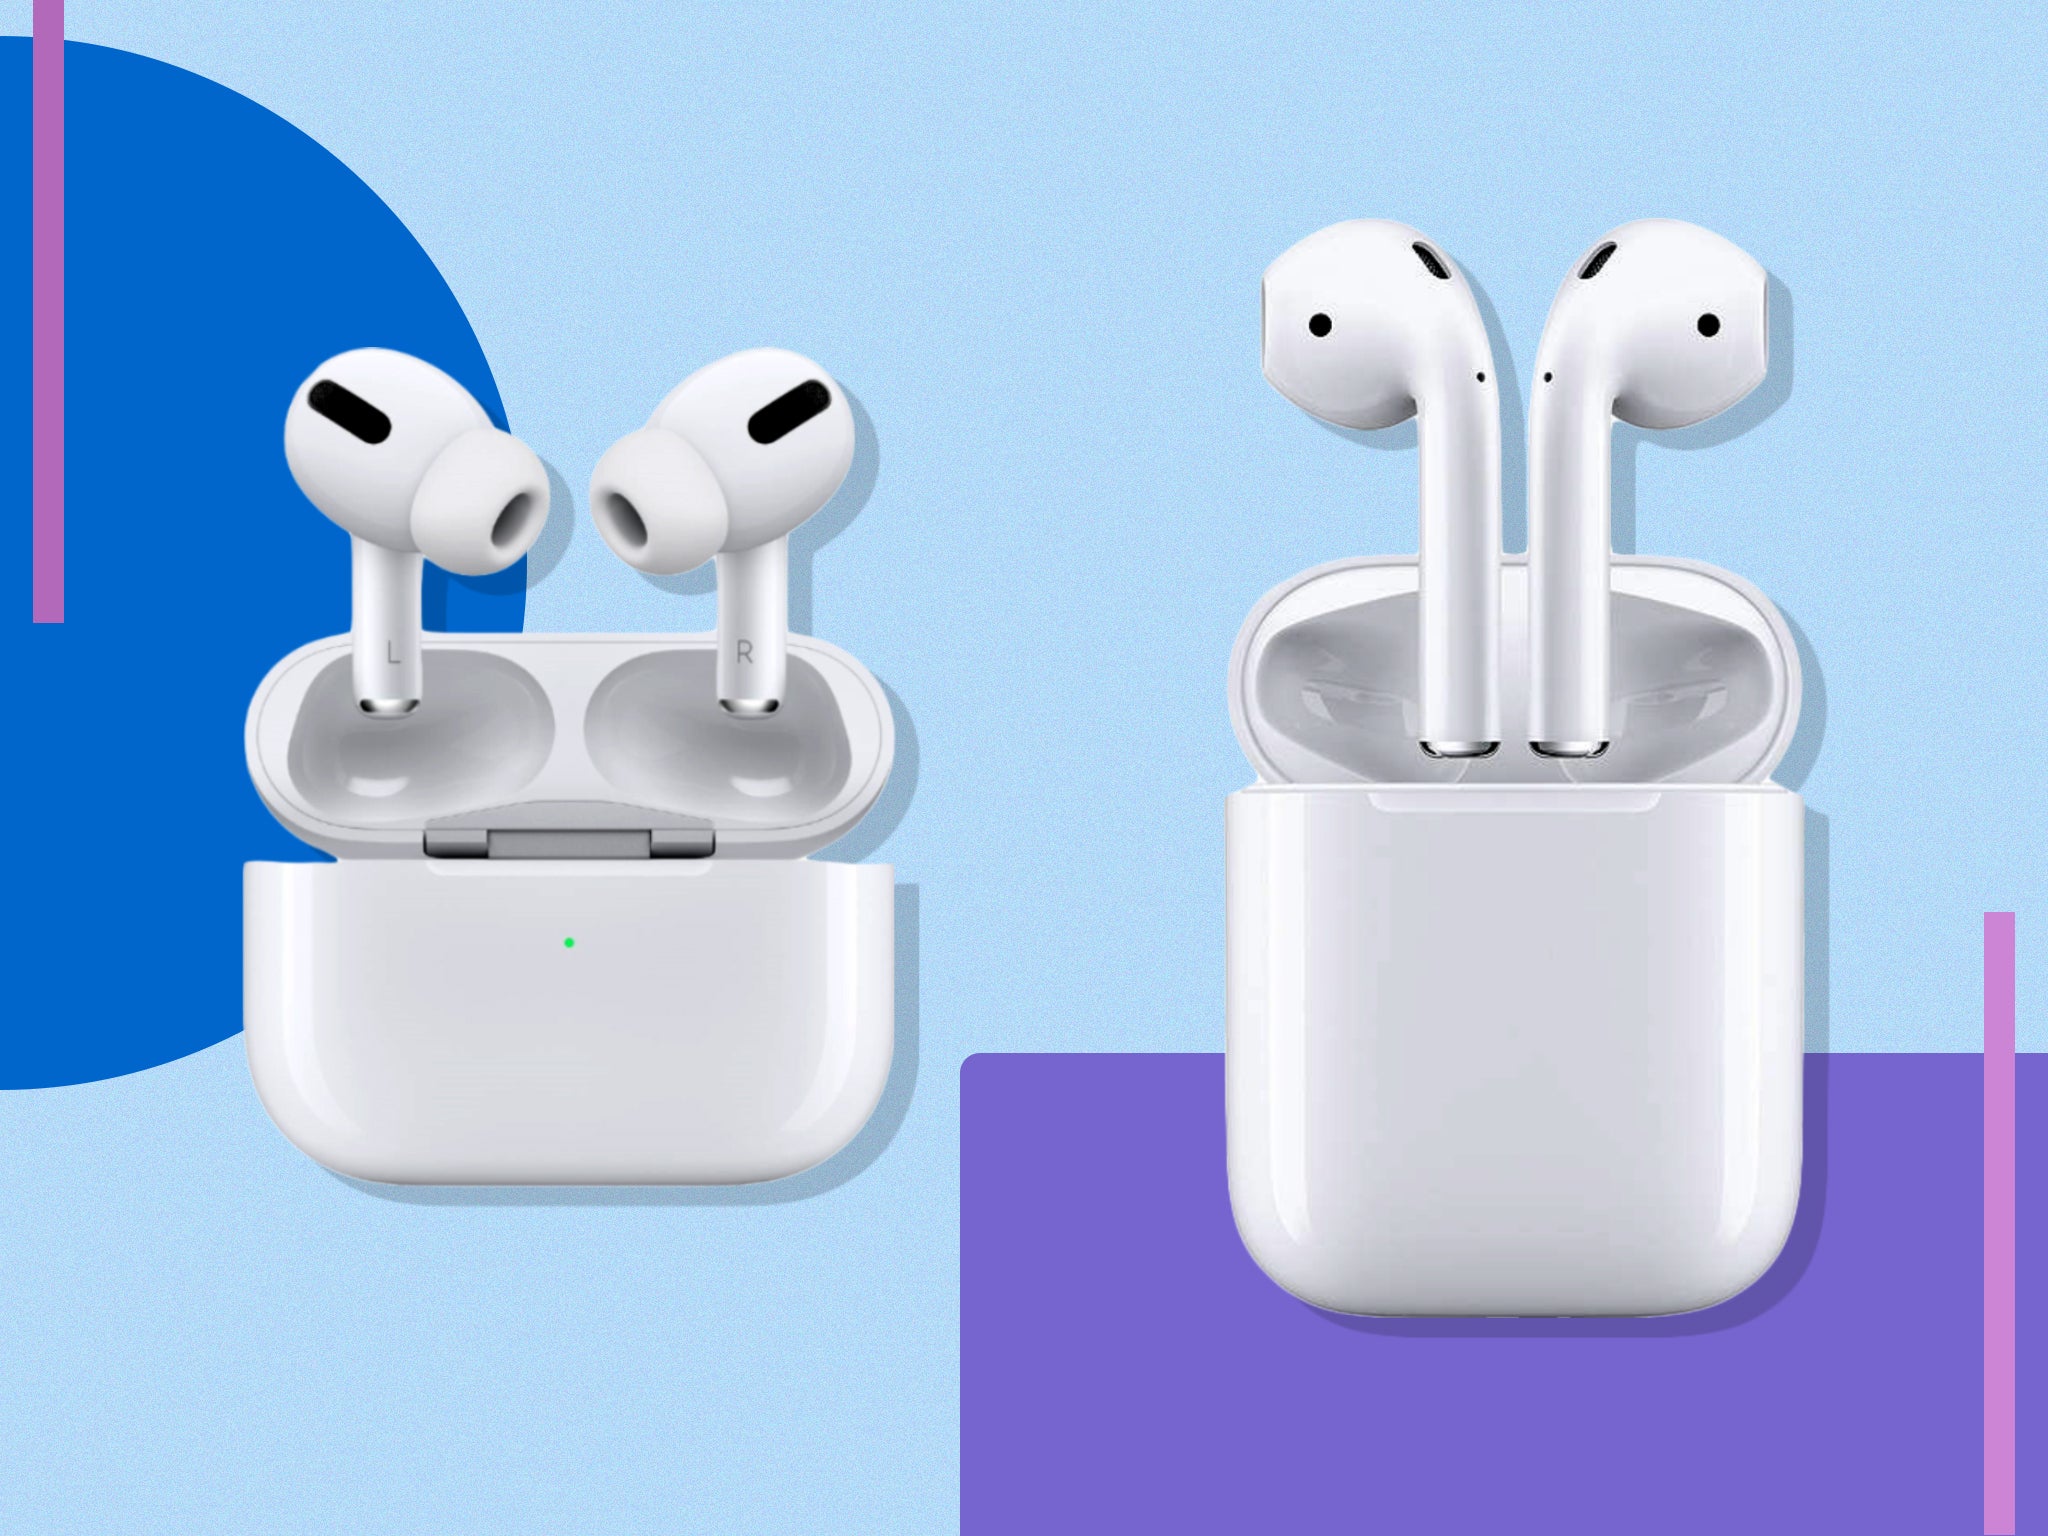 Both sets of AirPods earned rave reviews here at IndyBest, and now is the time to snap them up